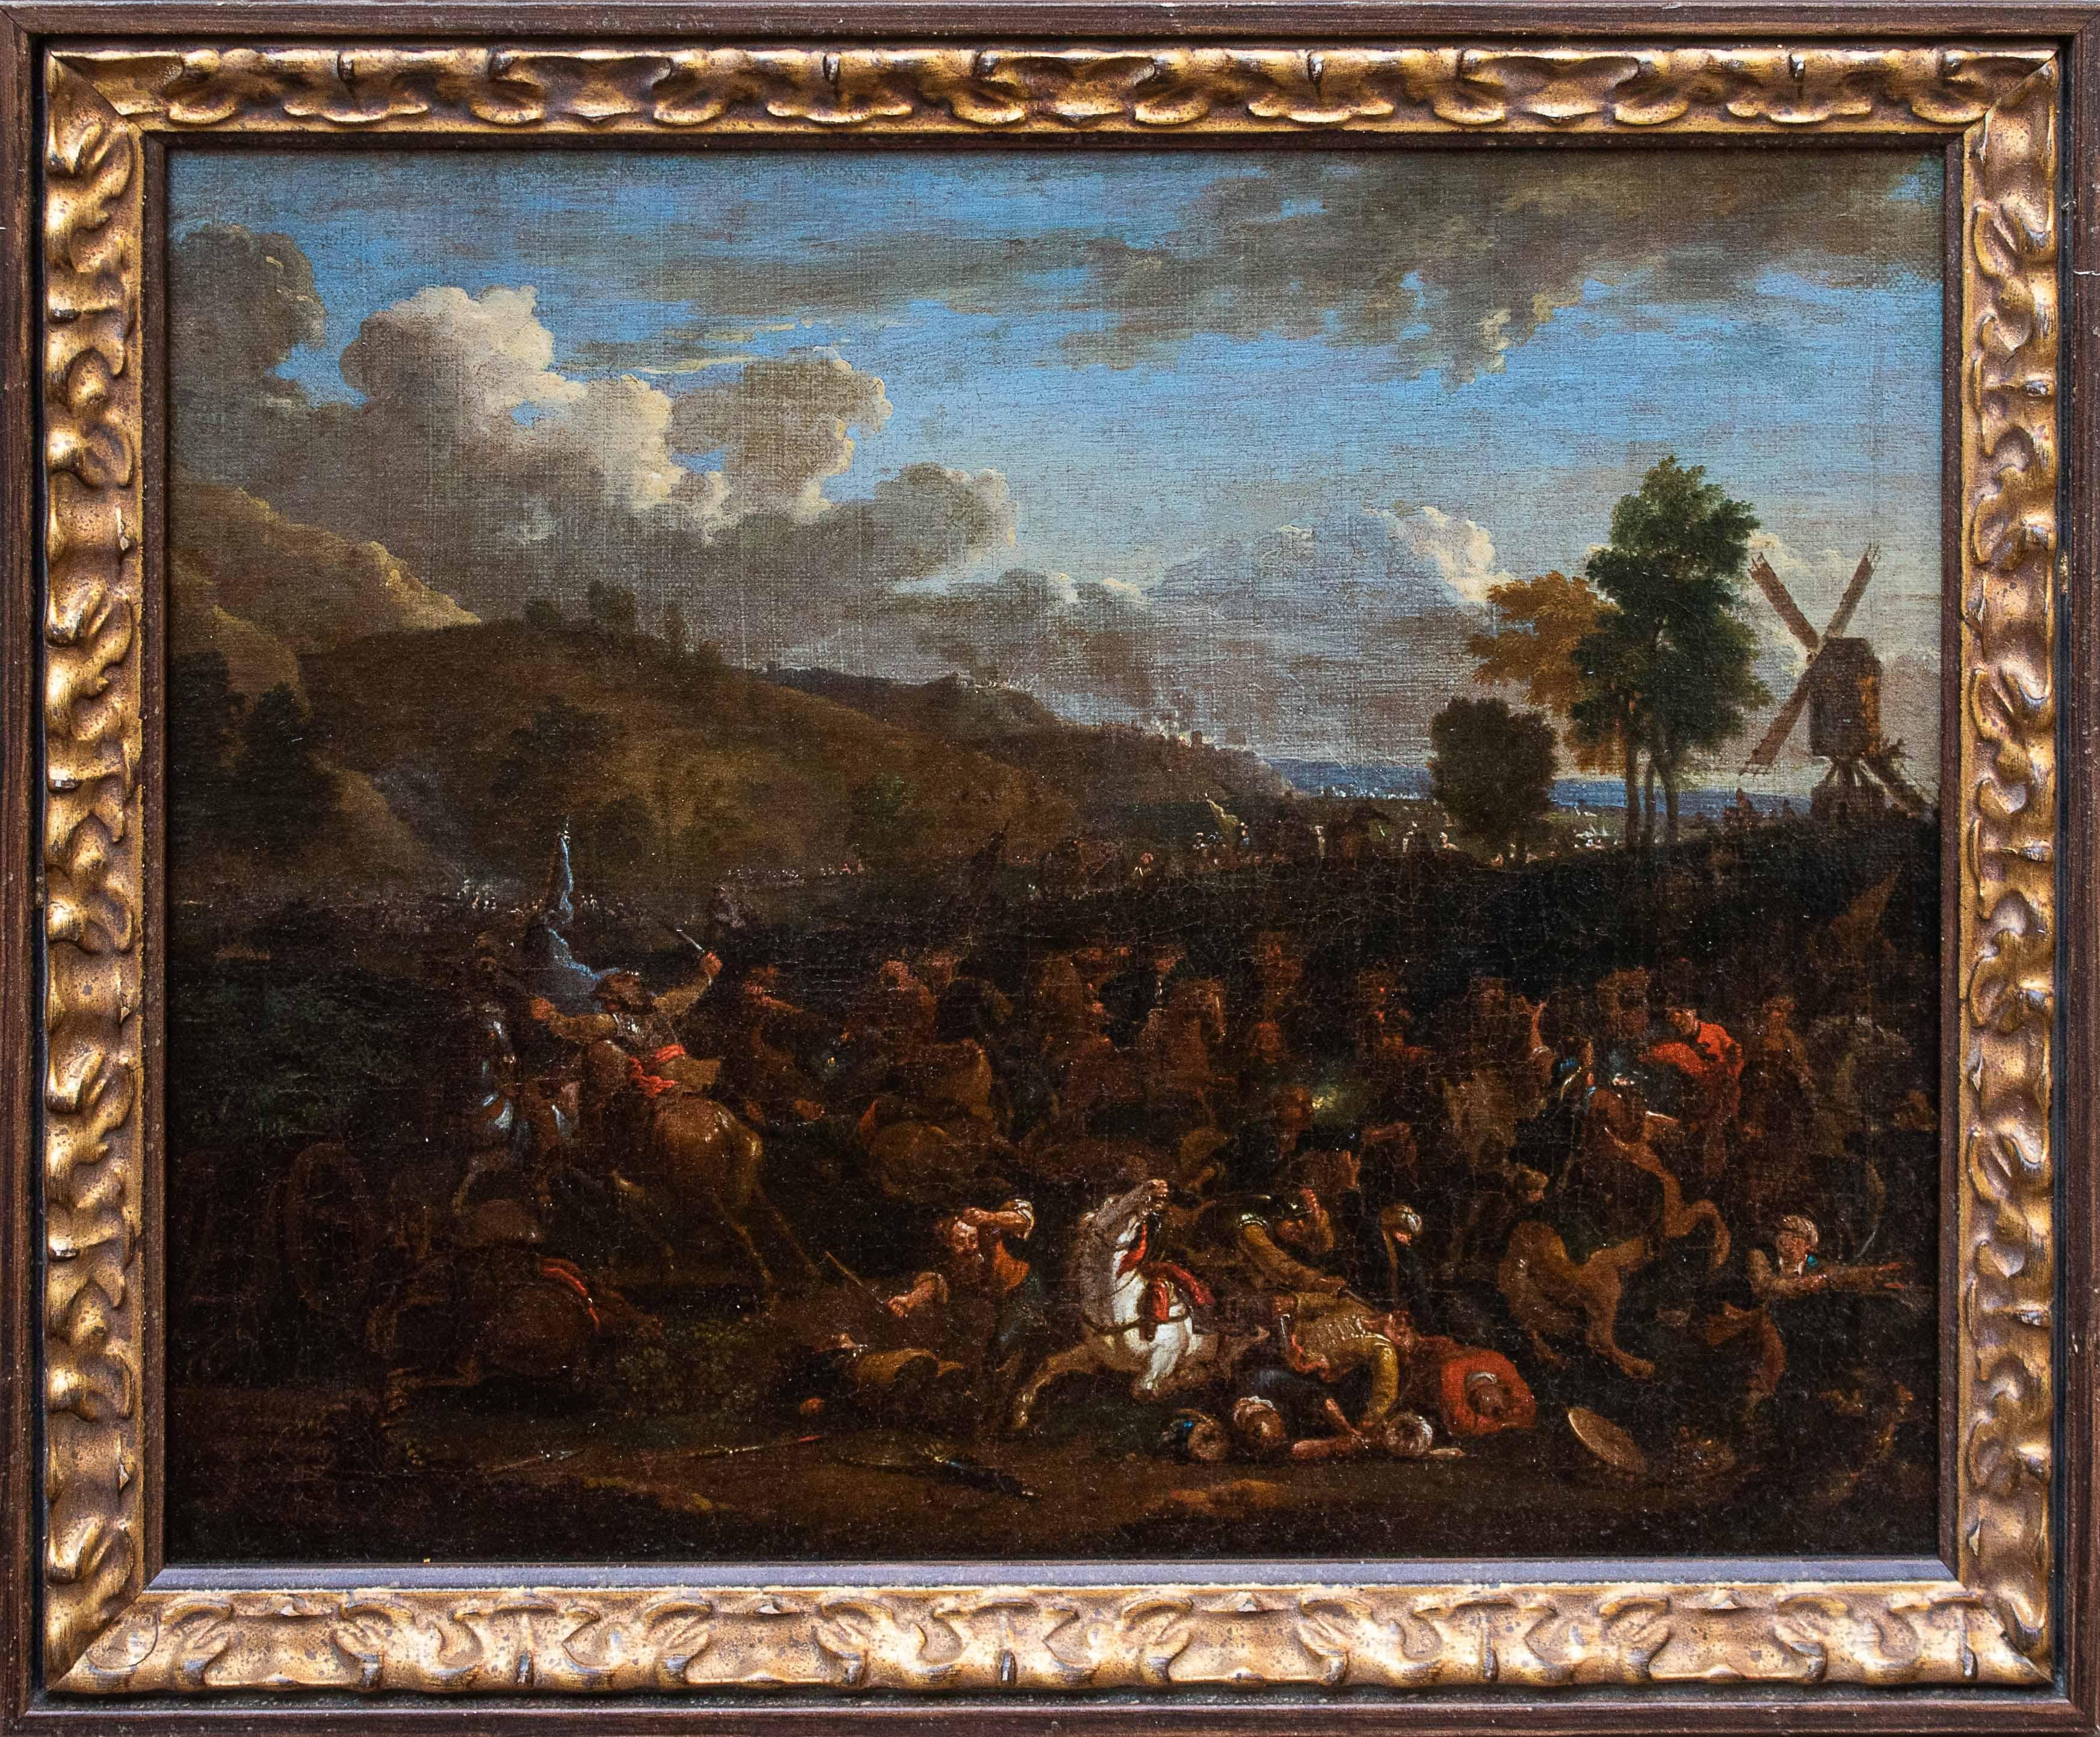 Attr. to Karel Breydel, known as the Knight of Antwerp (1678 - 1733)

Battle with knights and landscape in the background

Oil on canvas, cm 44.5 X 36.7

Frame 52.5 x 45 cm

The painting under consideration, considering the style, composition and